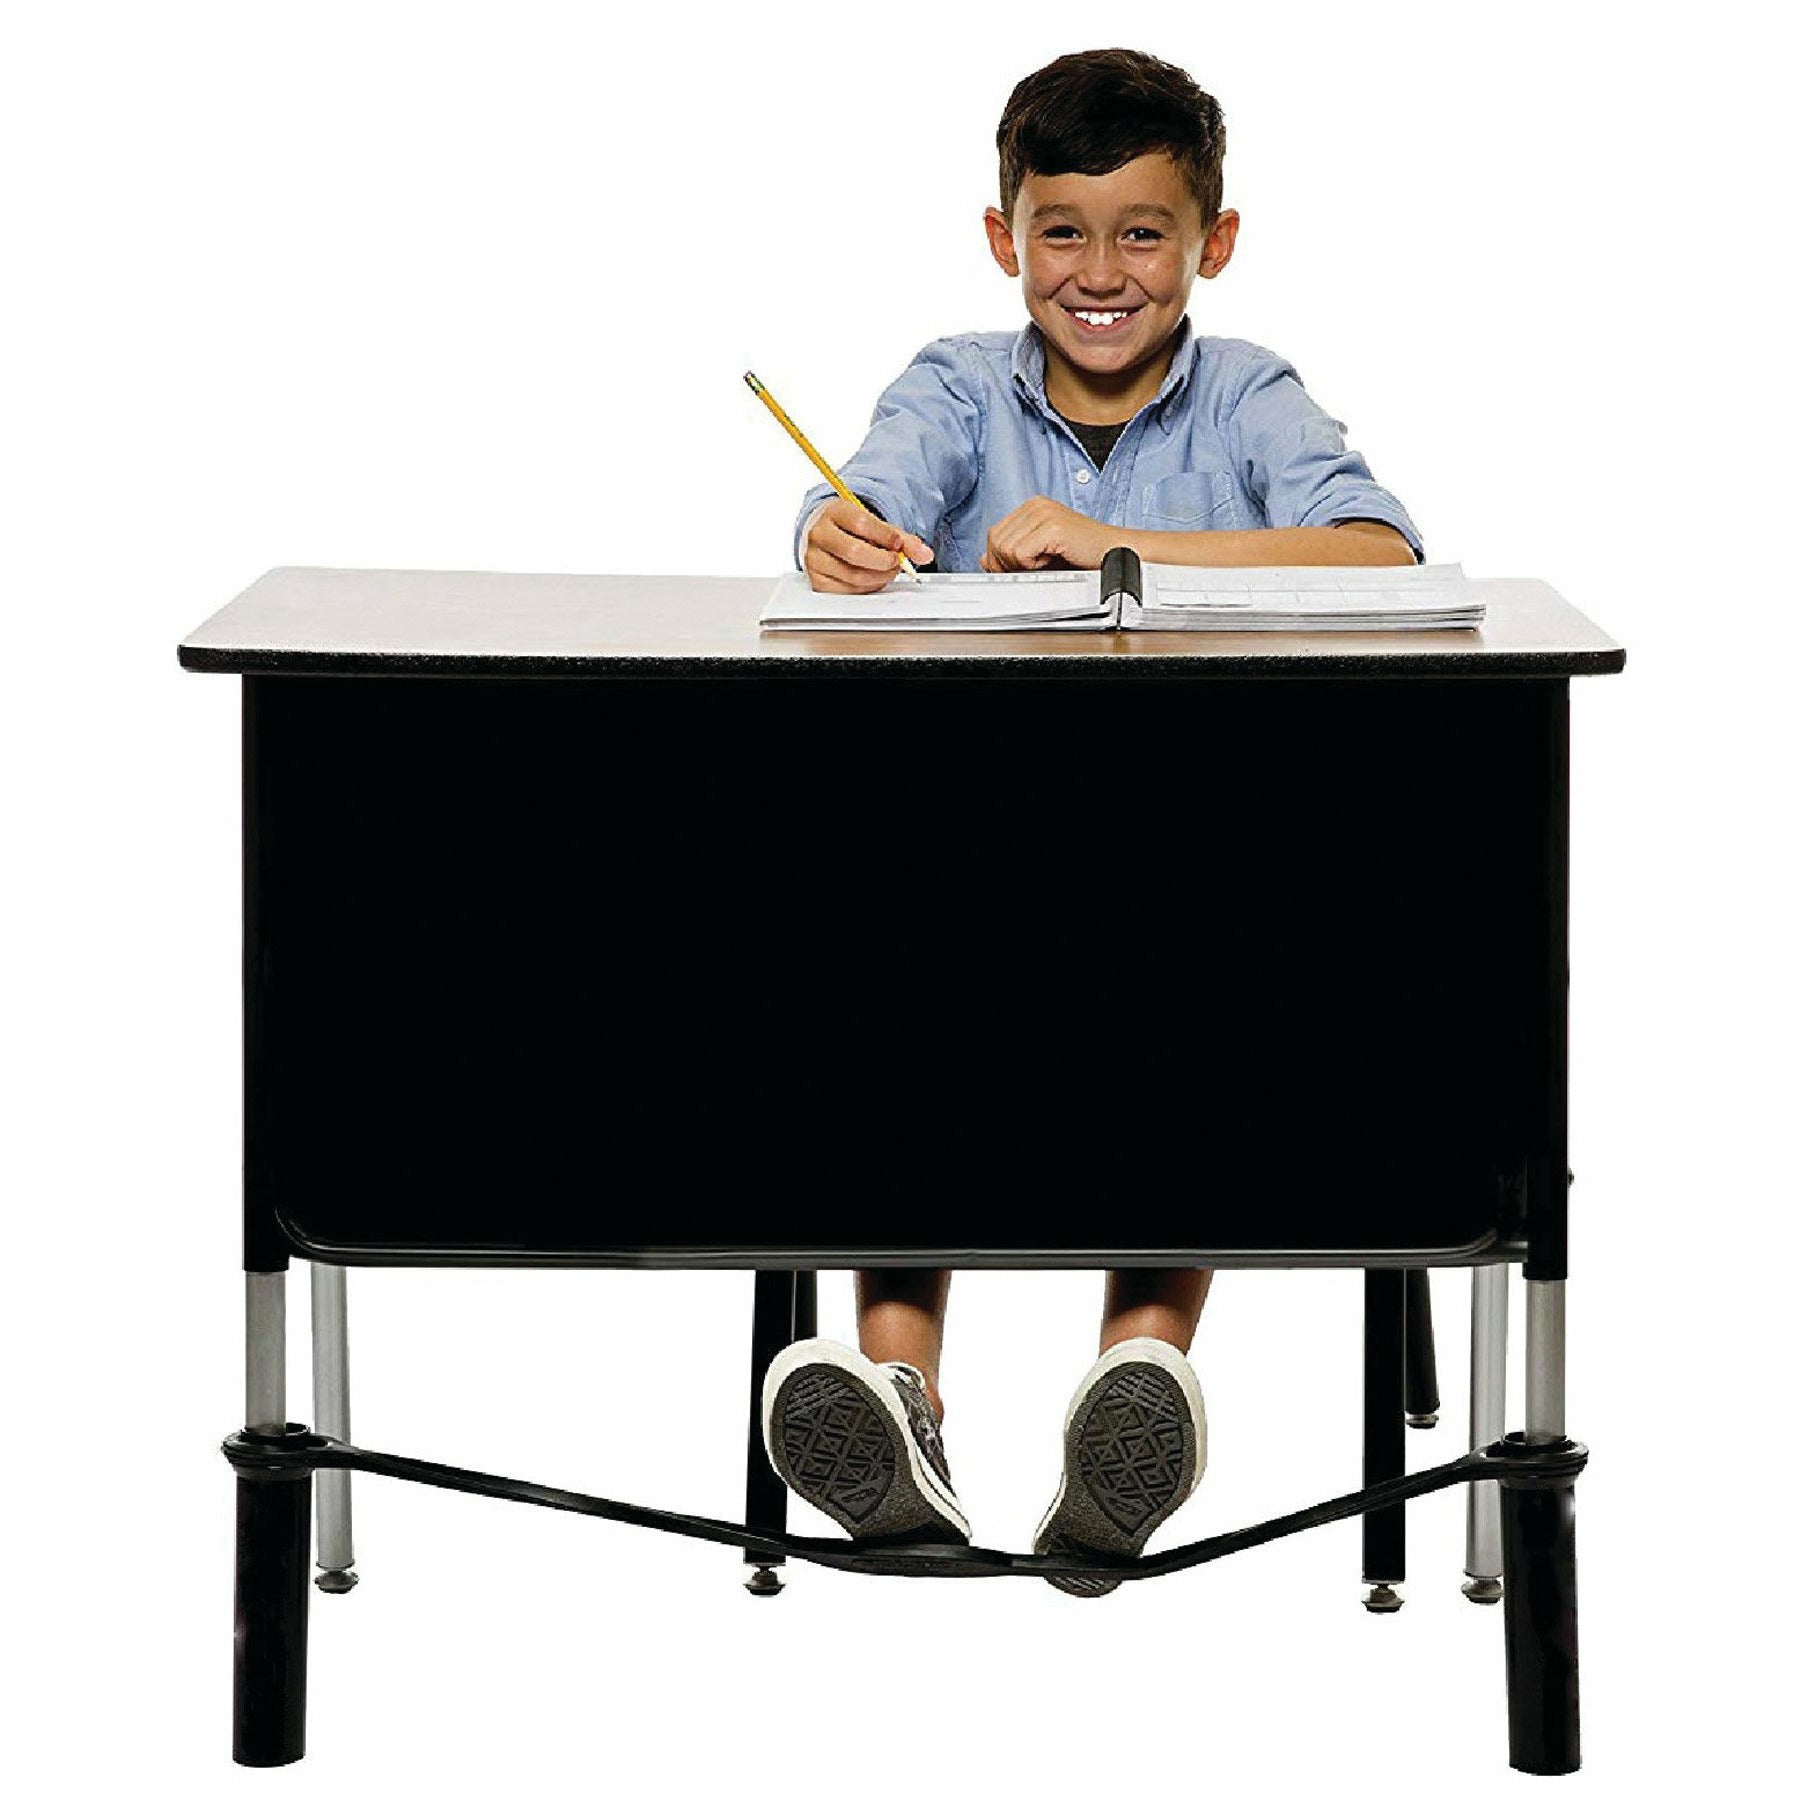 Bouncyband® Student Edition For Wide Desks, Tubes